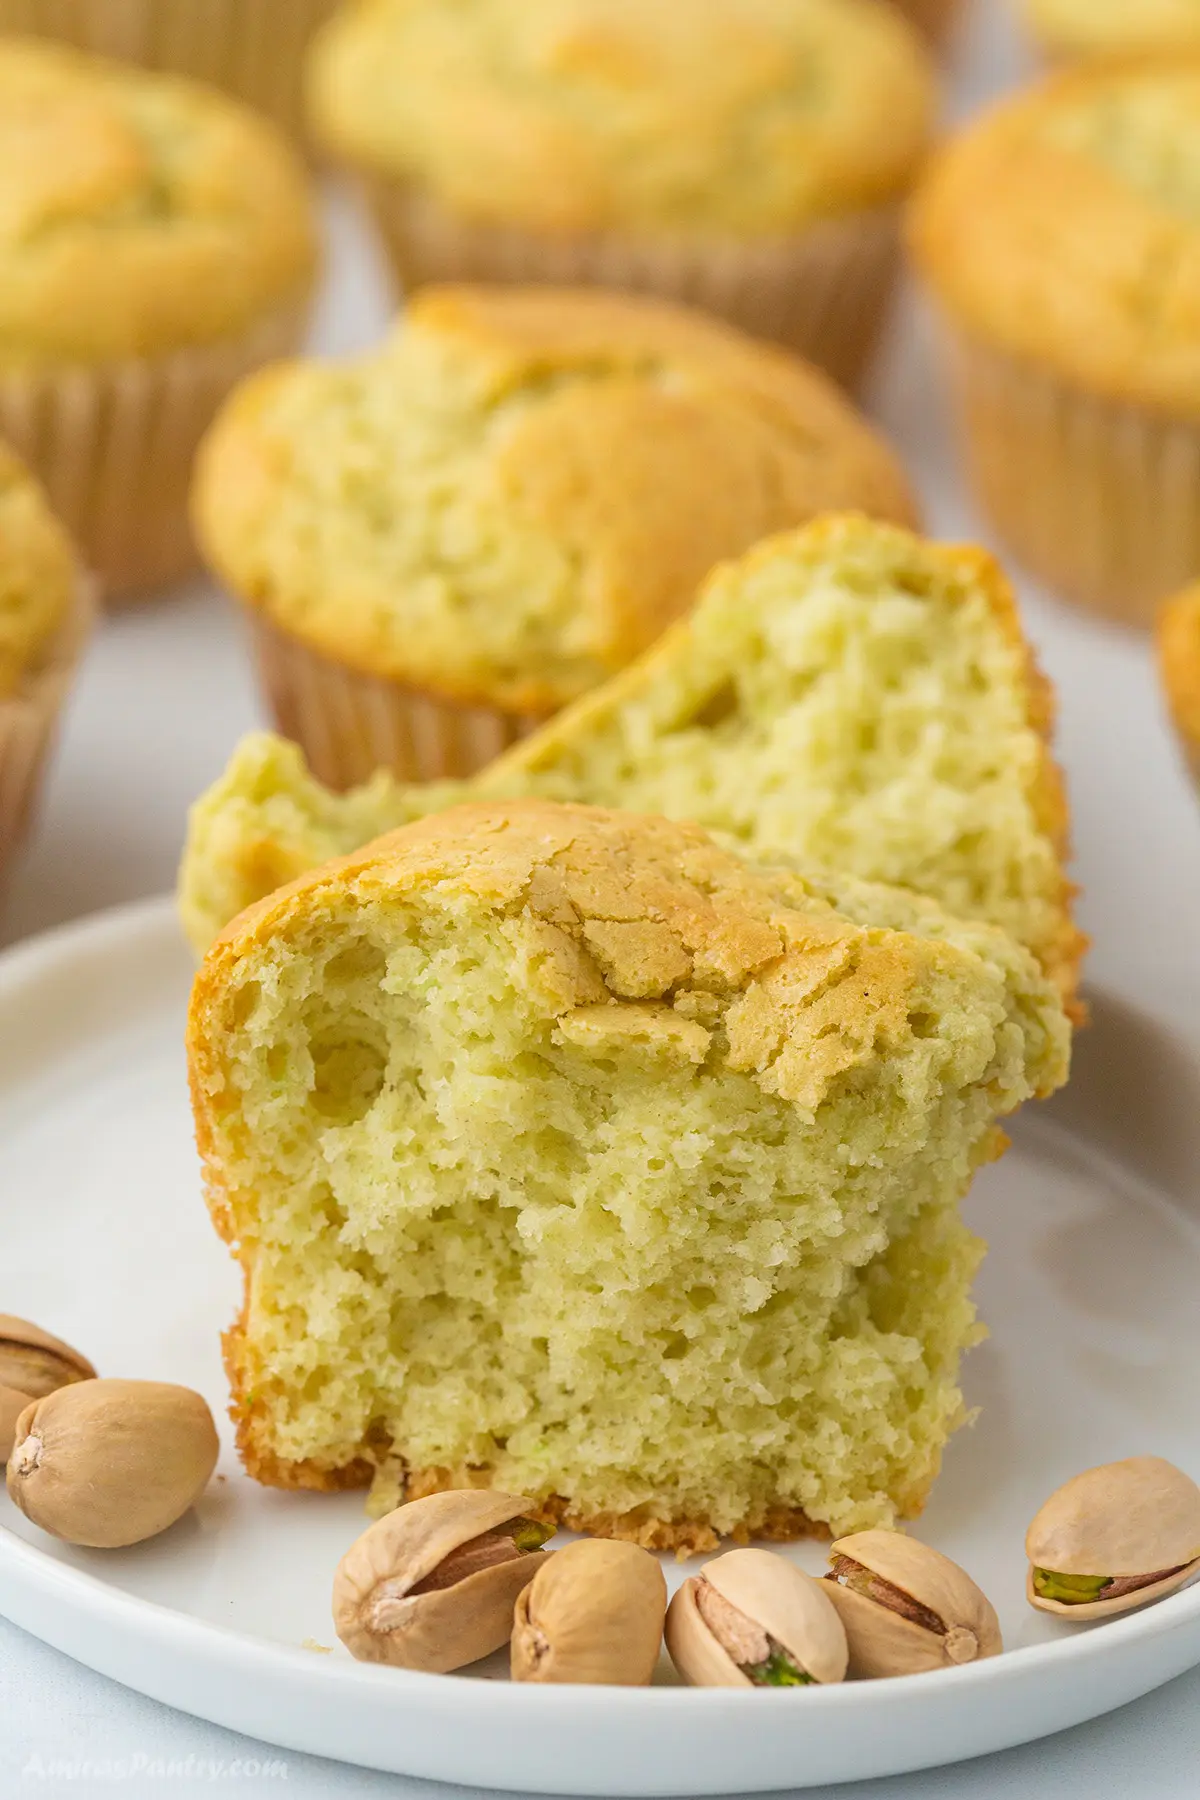 A pistachio muffin on a small plate cut open to show texture.